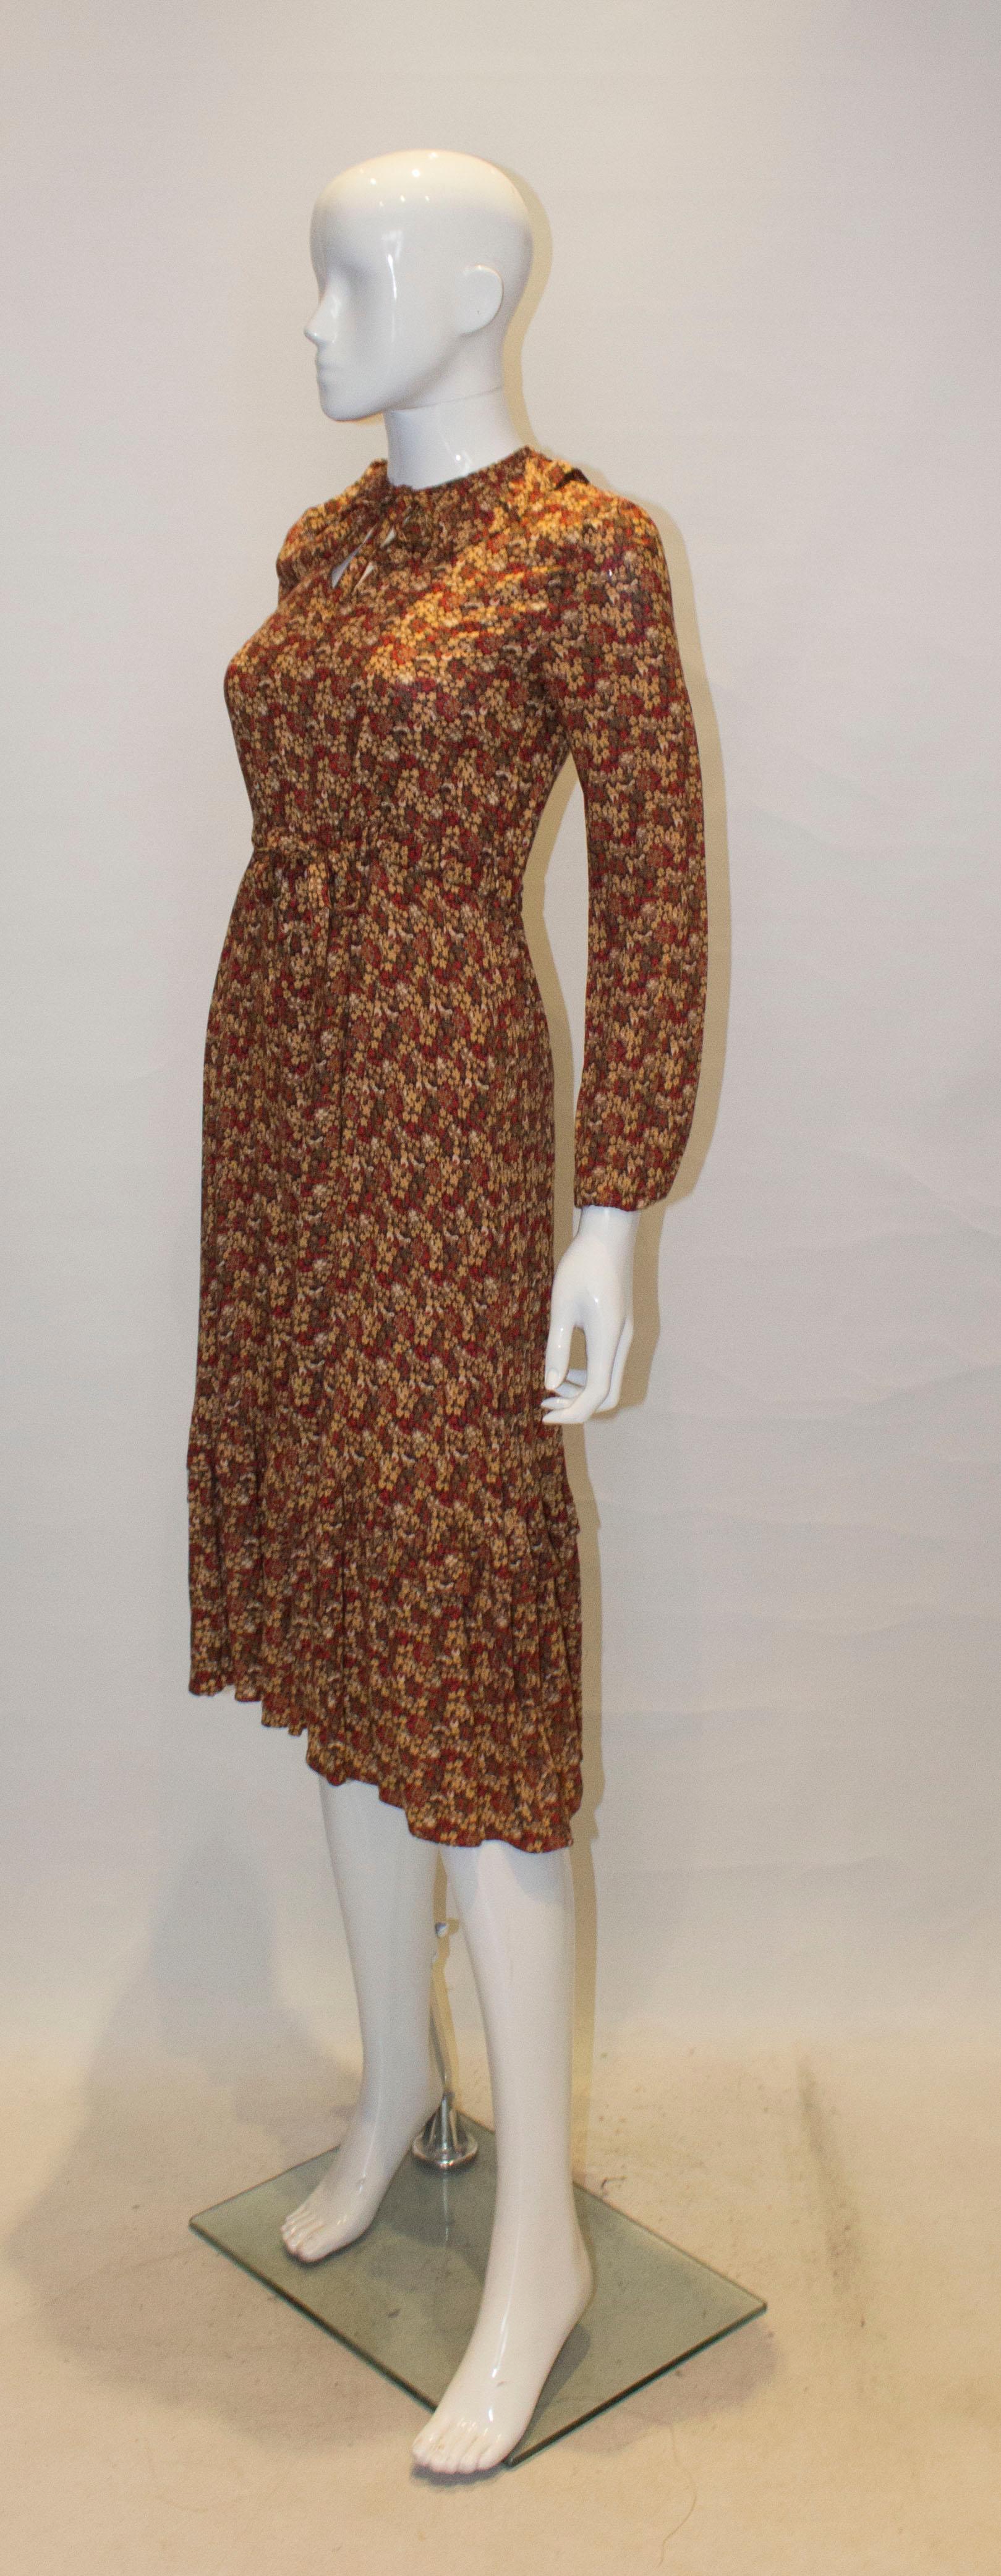 Brown Vintage 1970s Floral Print Dress with Frill Collar For Sale